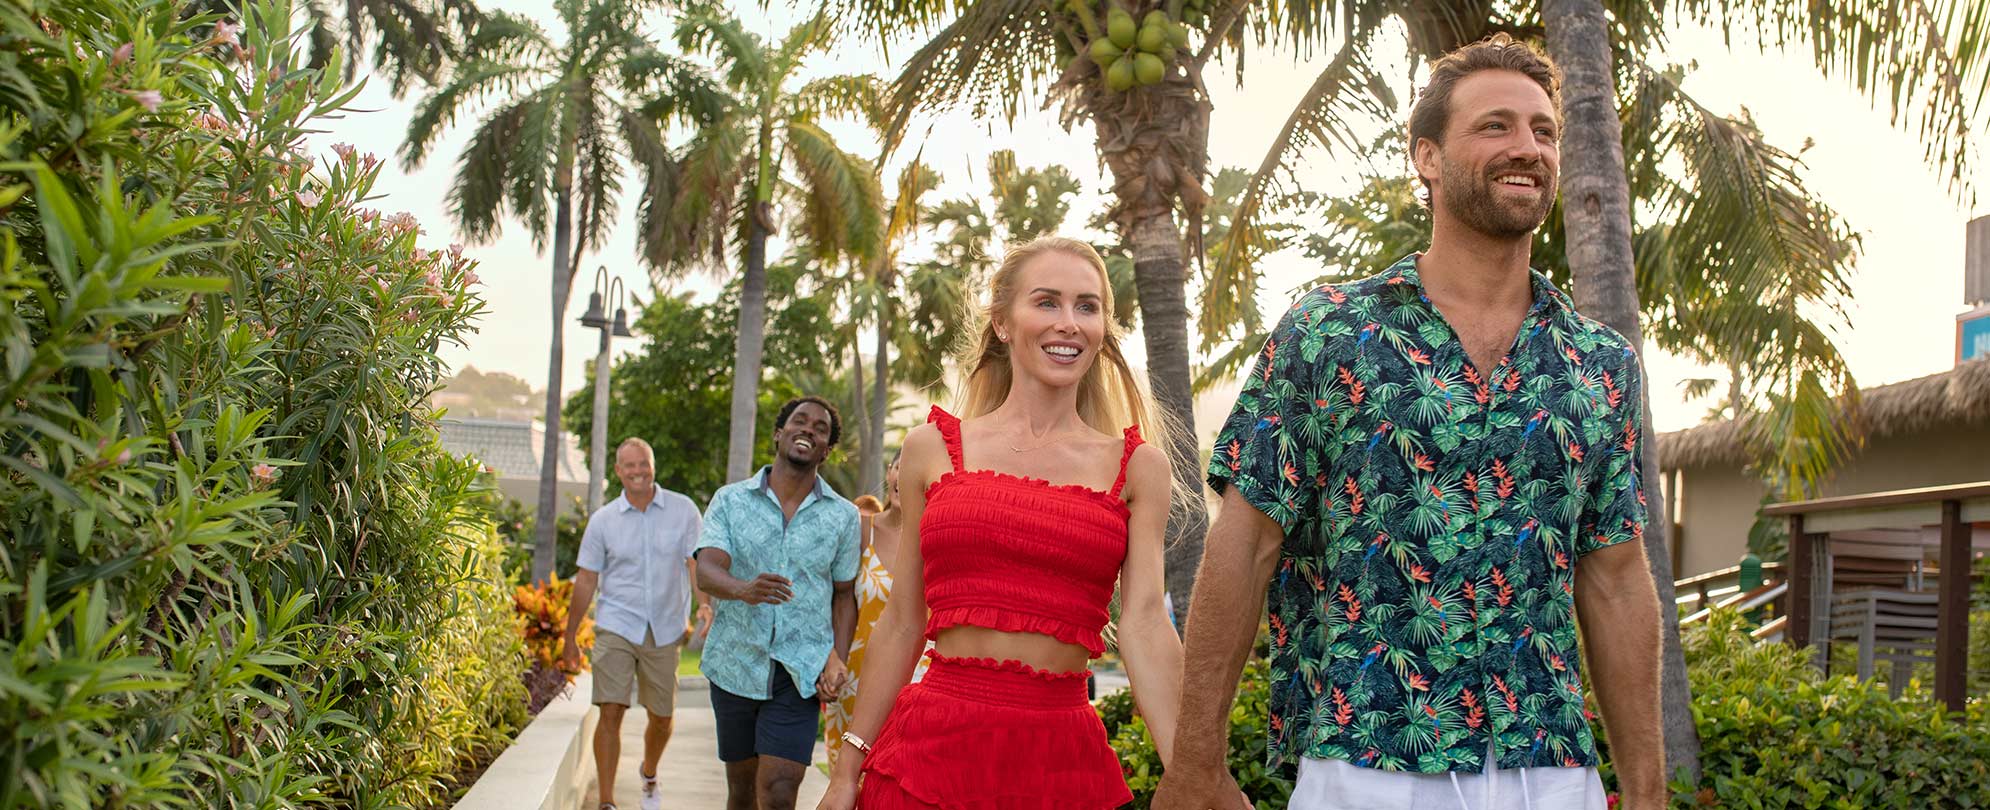 Men and women wearing bright, summer clothes, walk along a path surrounded by palms at a Margaritaville Vacation Club resort.